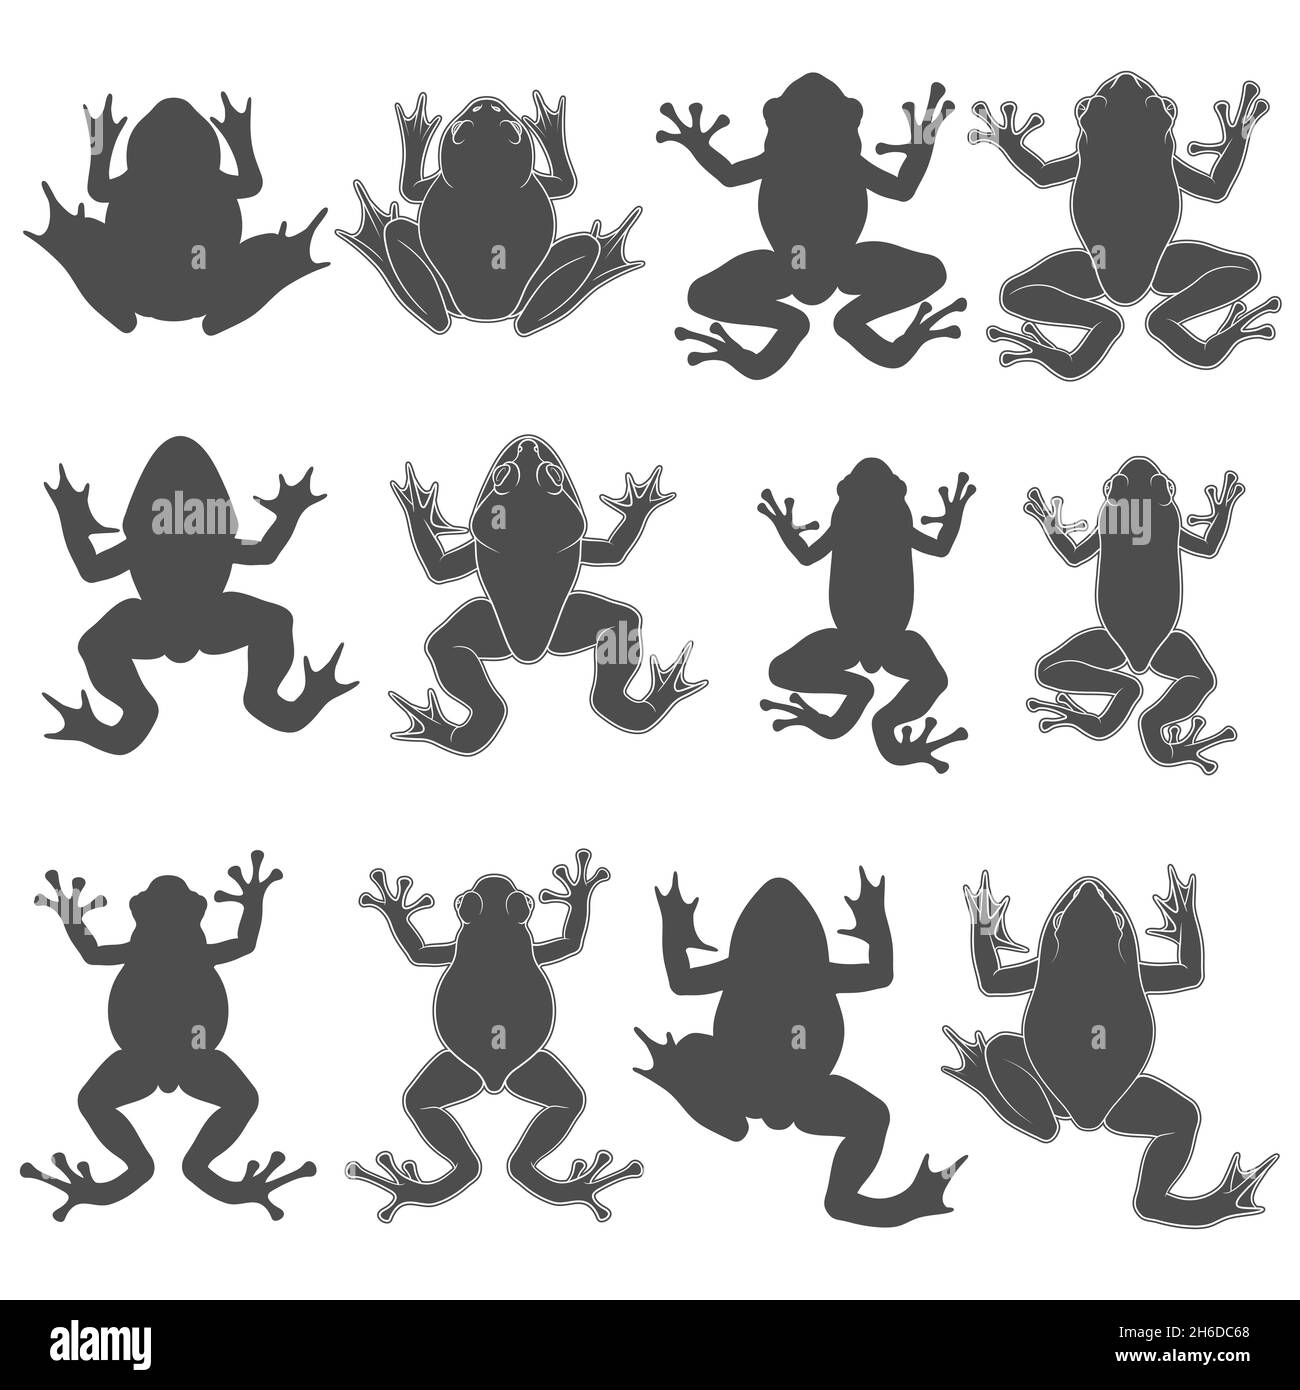 Set of black and white illustrations with tree and river frogs. Isolated vector objects on white background. Stock Vector